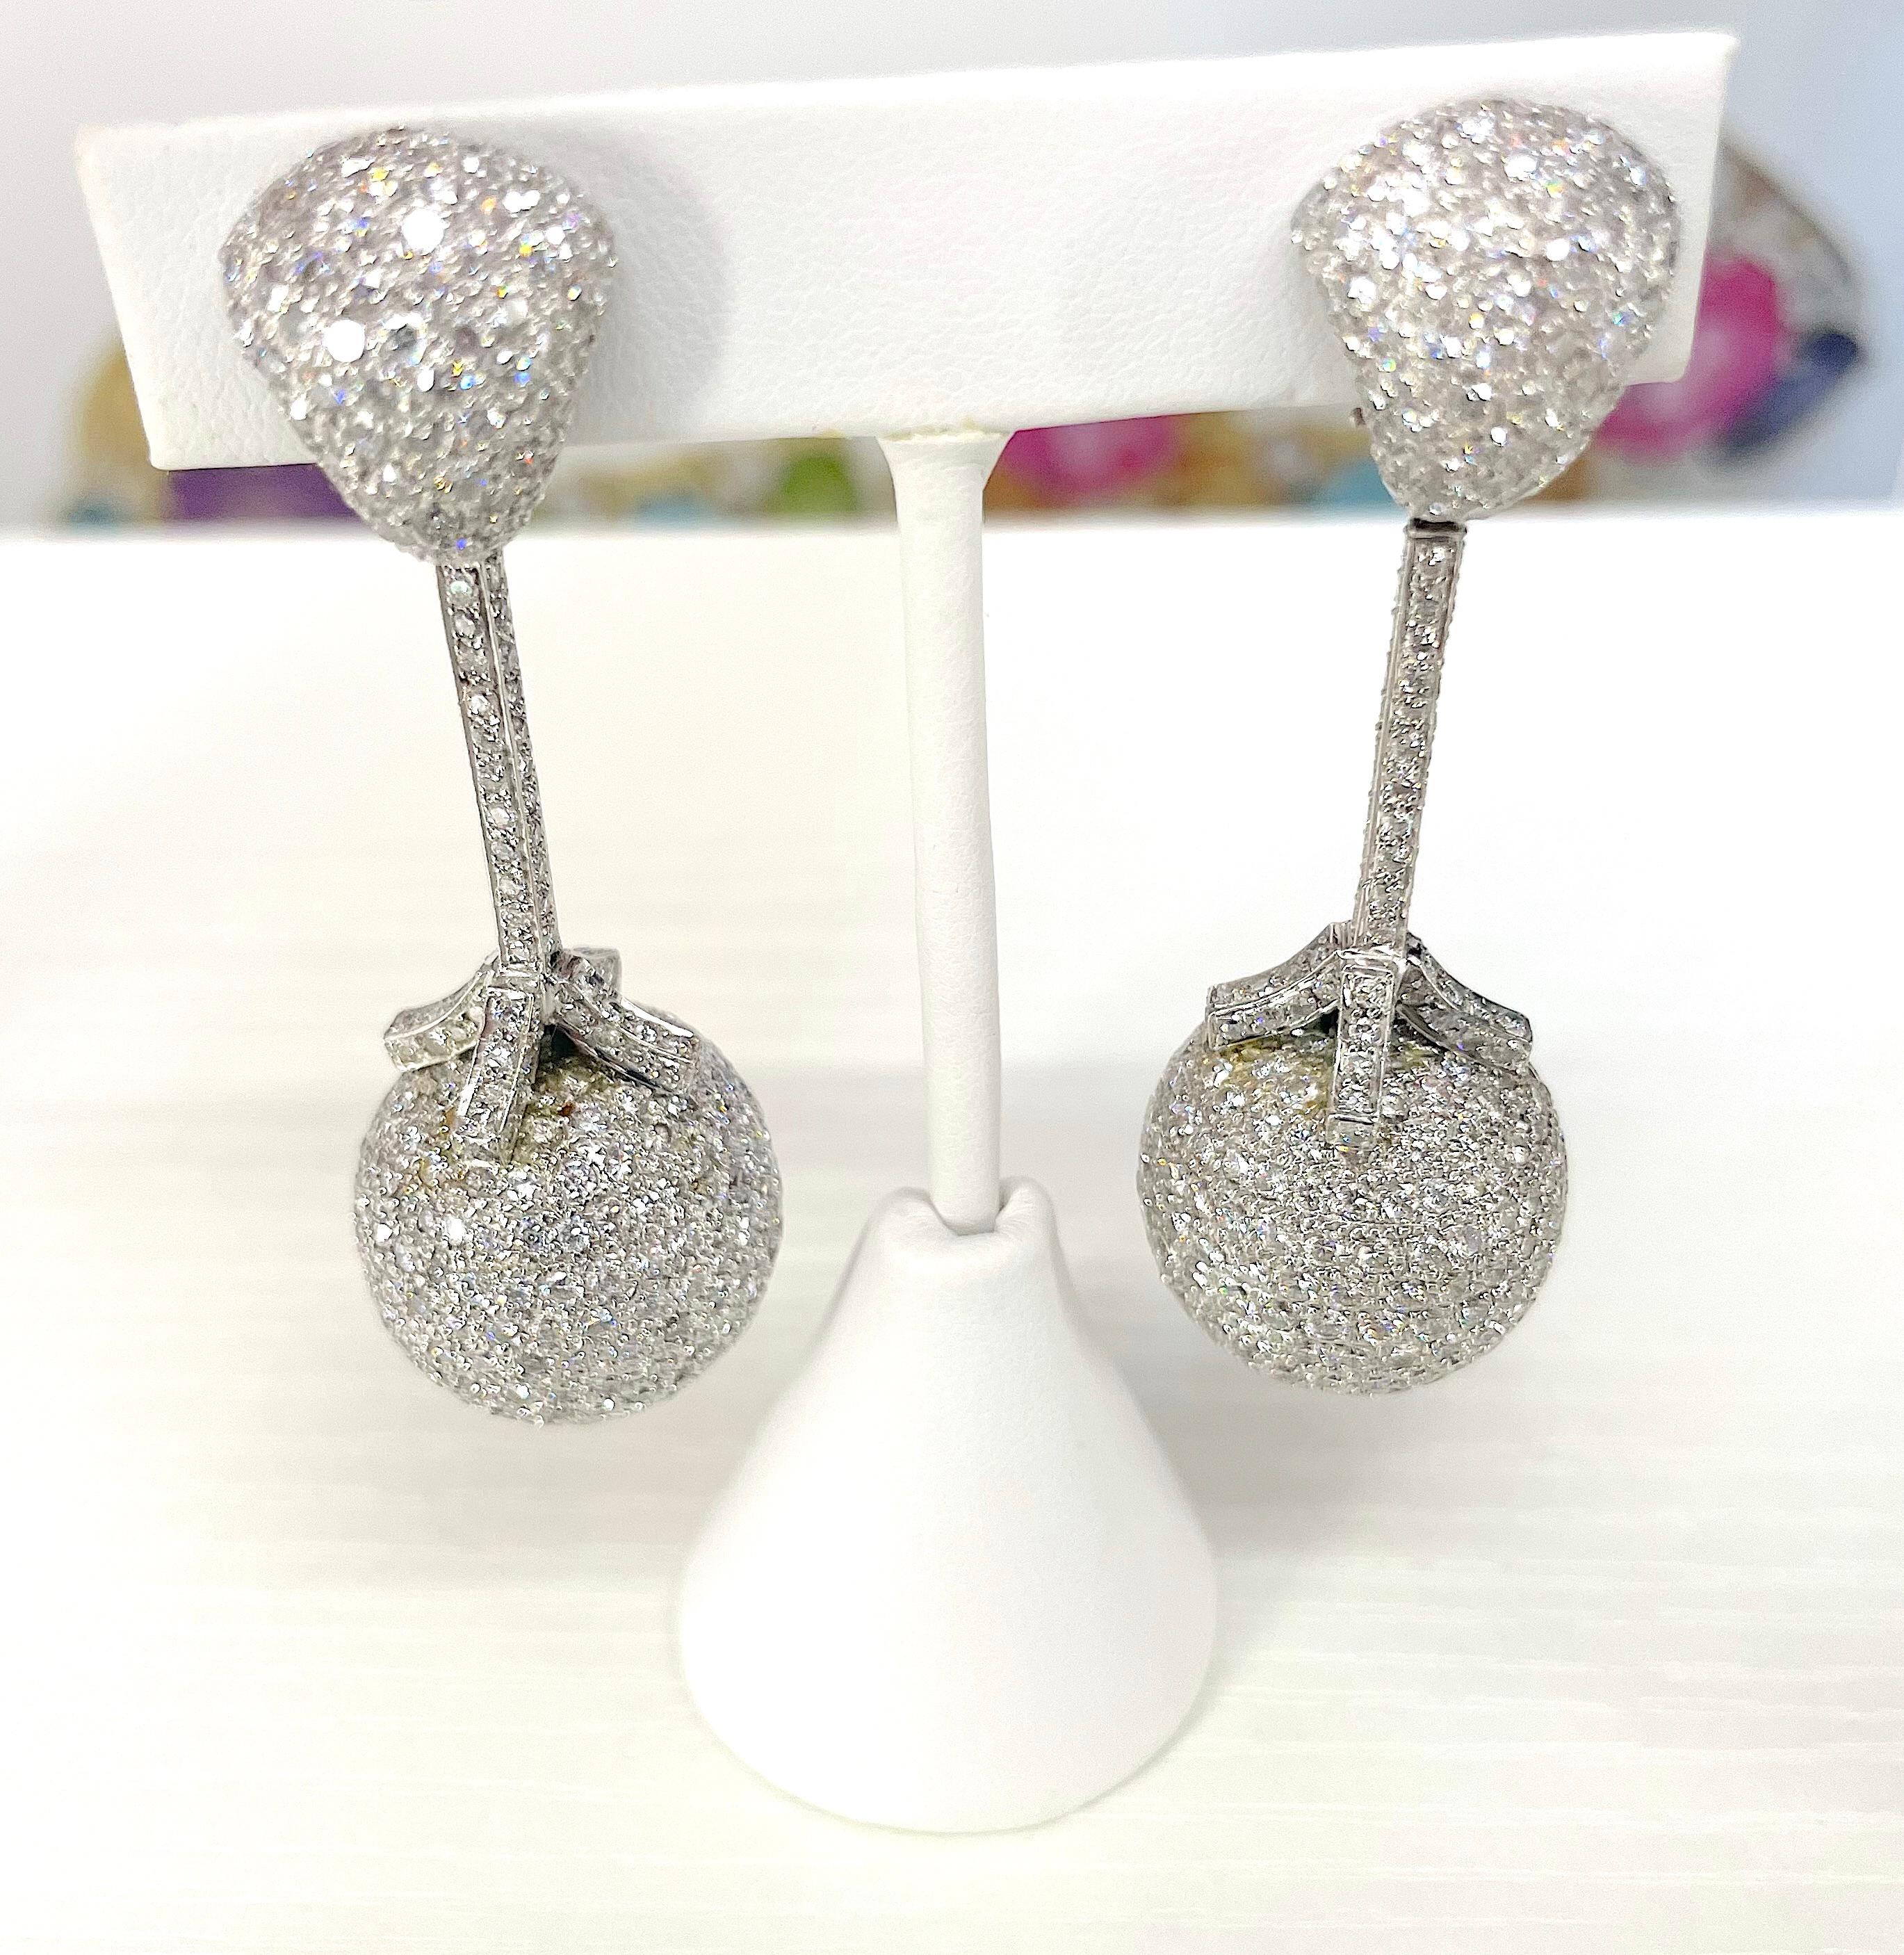 Large Platinum and Diamond Ball Drop Earring.  

This One of a Kind Bold Statement earring measures approximately 3